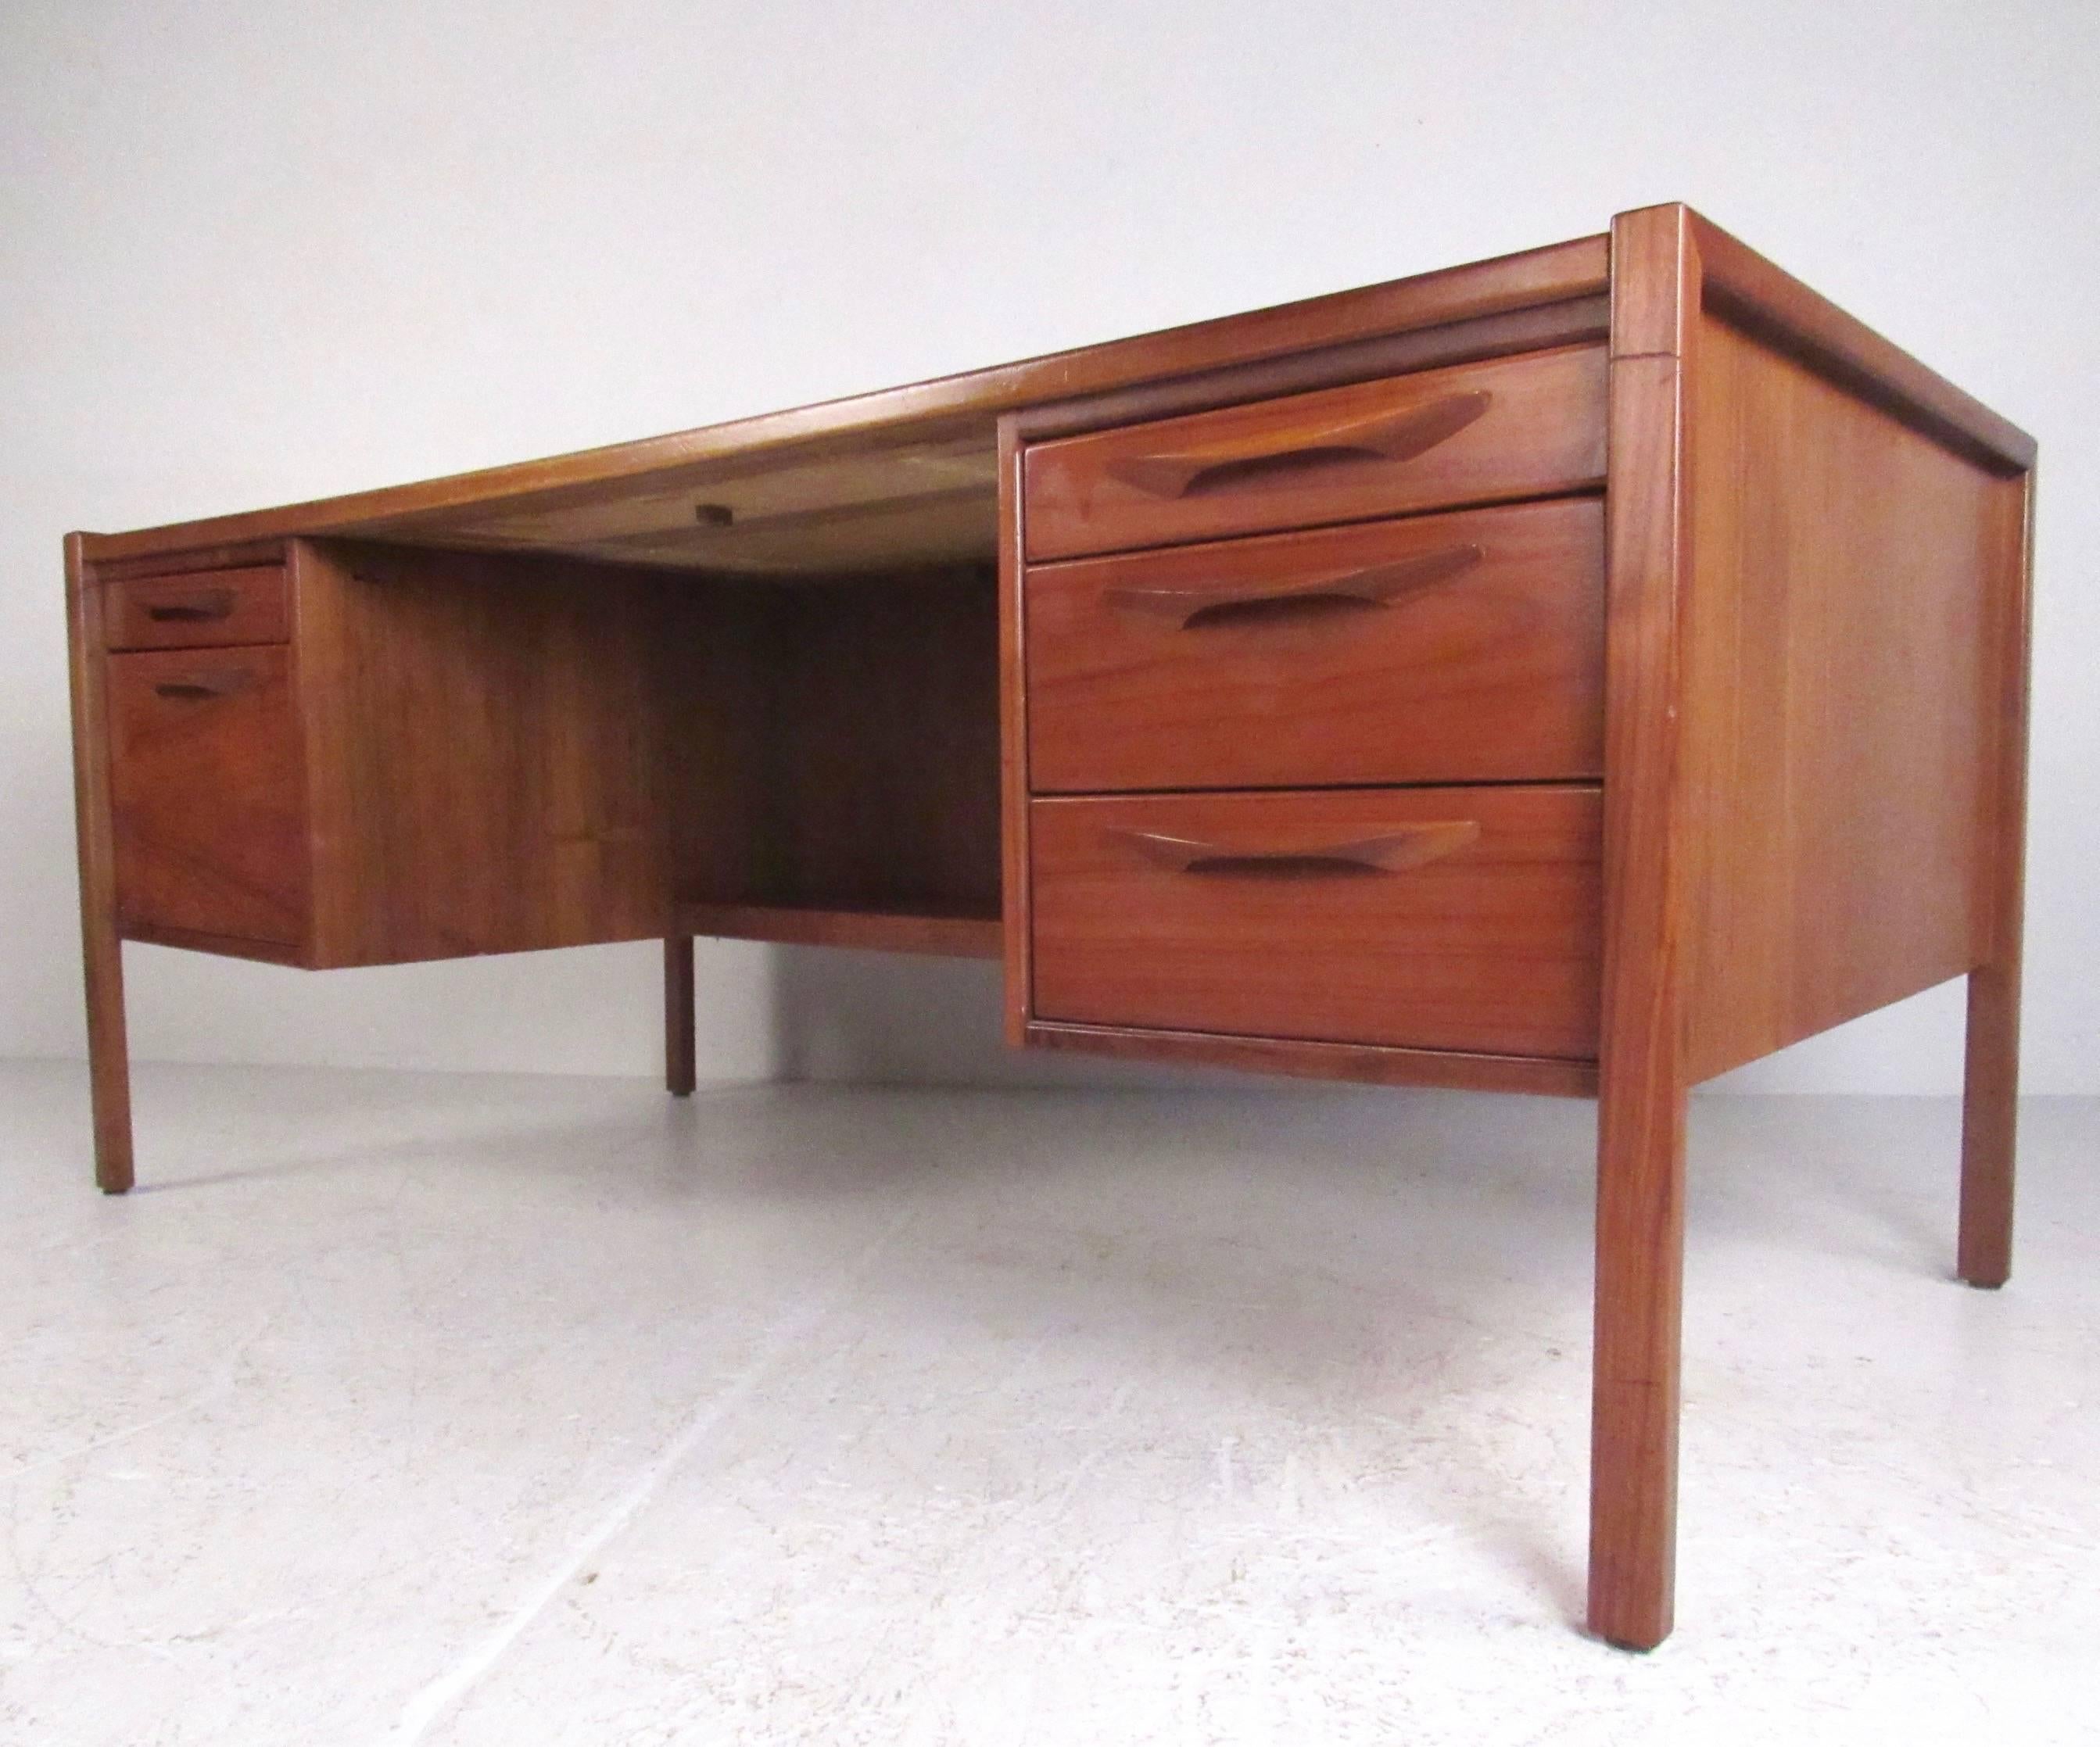 This beautiful Jens Risom executive desk features stylish teak construction with eye lash handles, and plenty of workspace for home or business office. The desks cutaway, finished back adds to it's Mid-Century charm, making an impressive visual